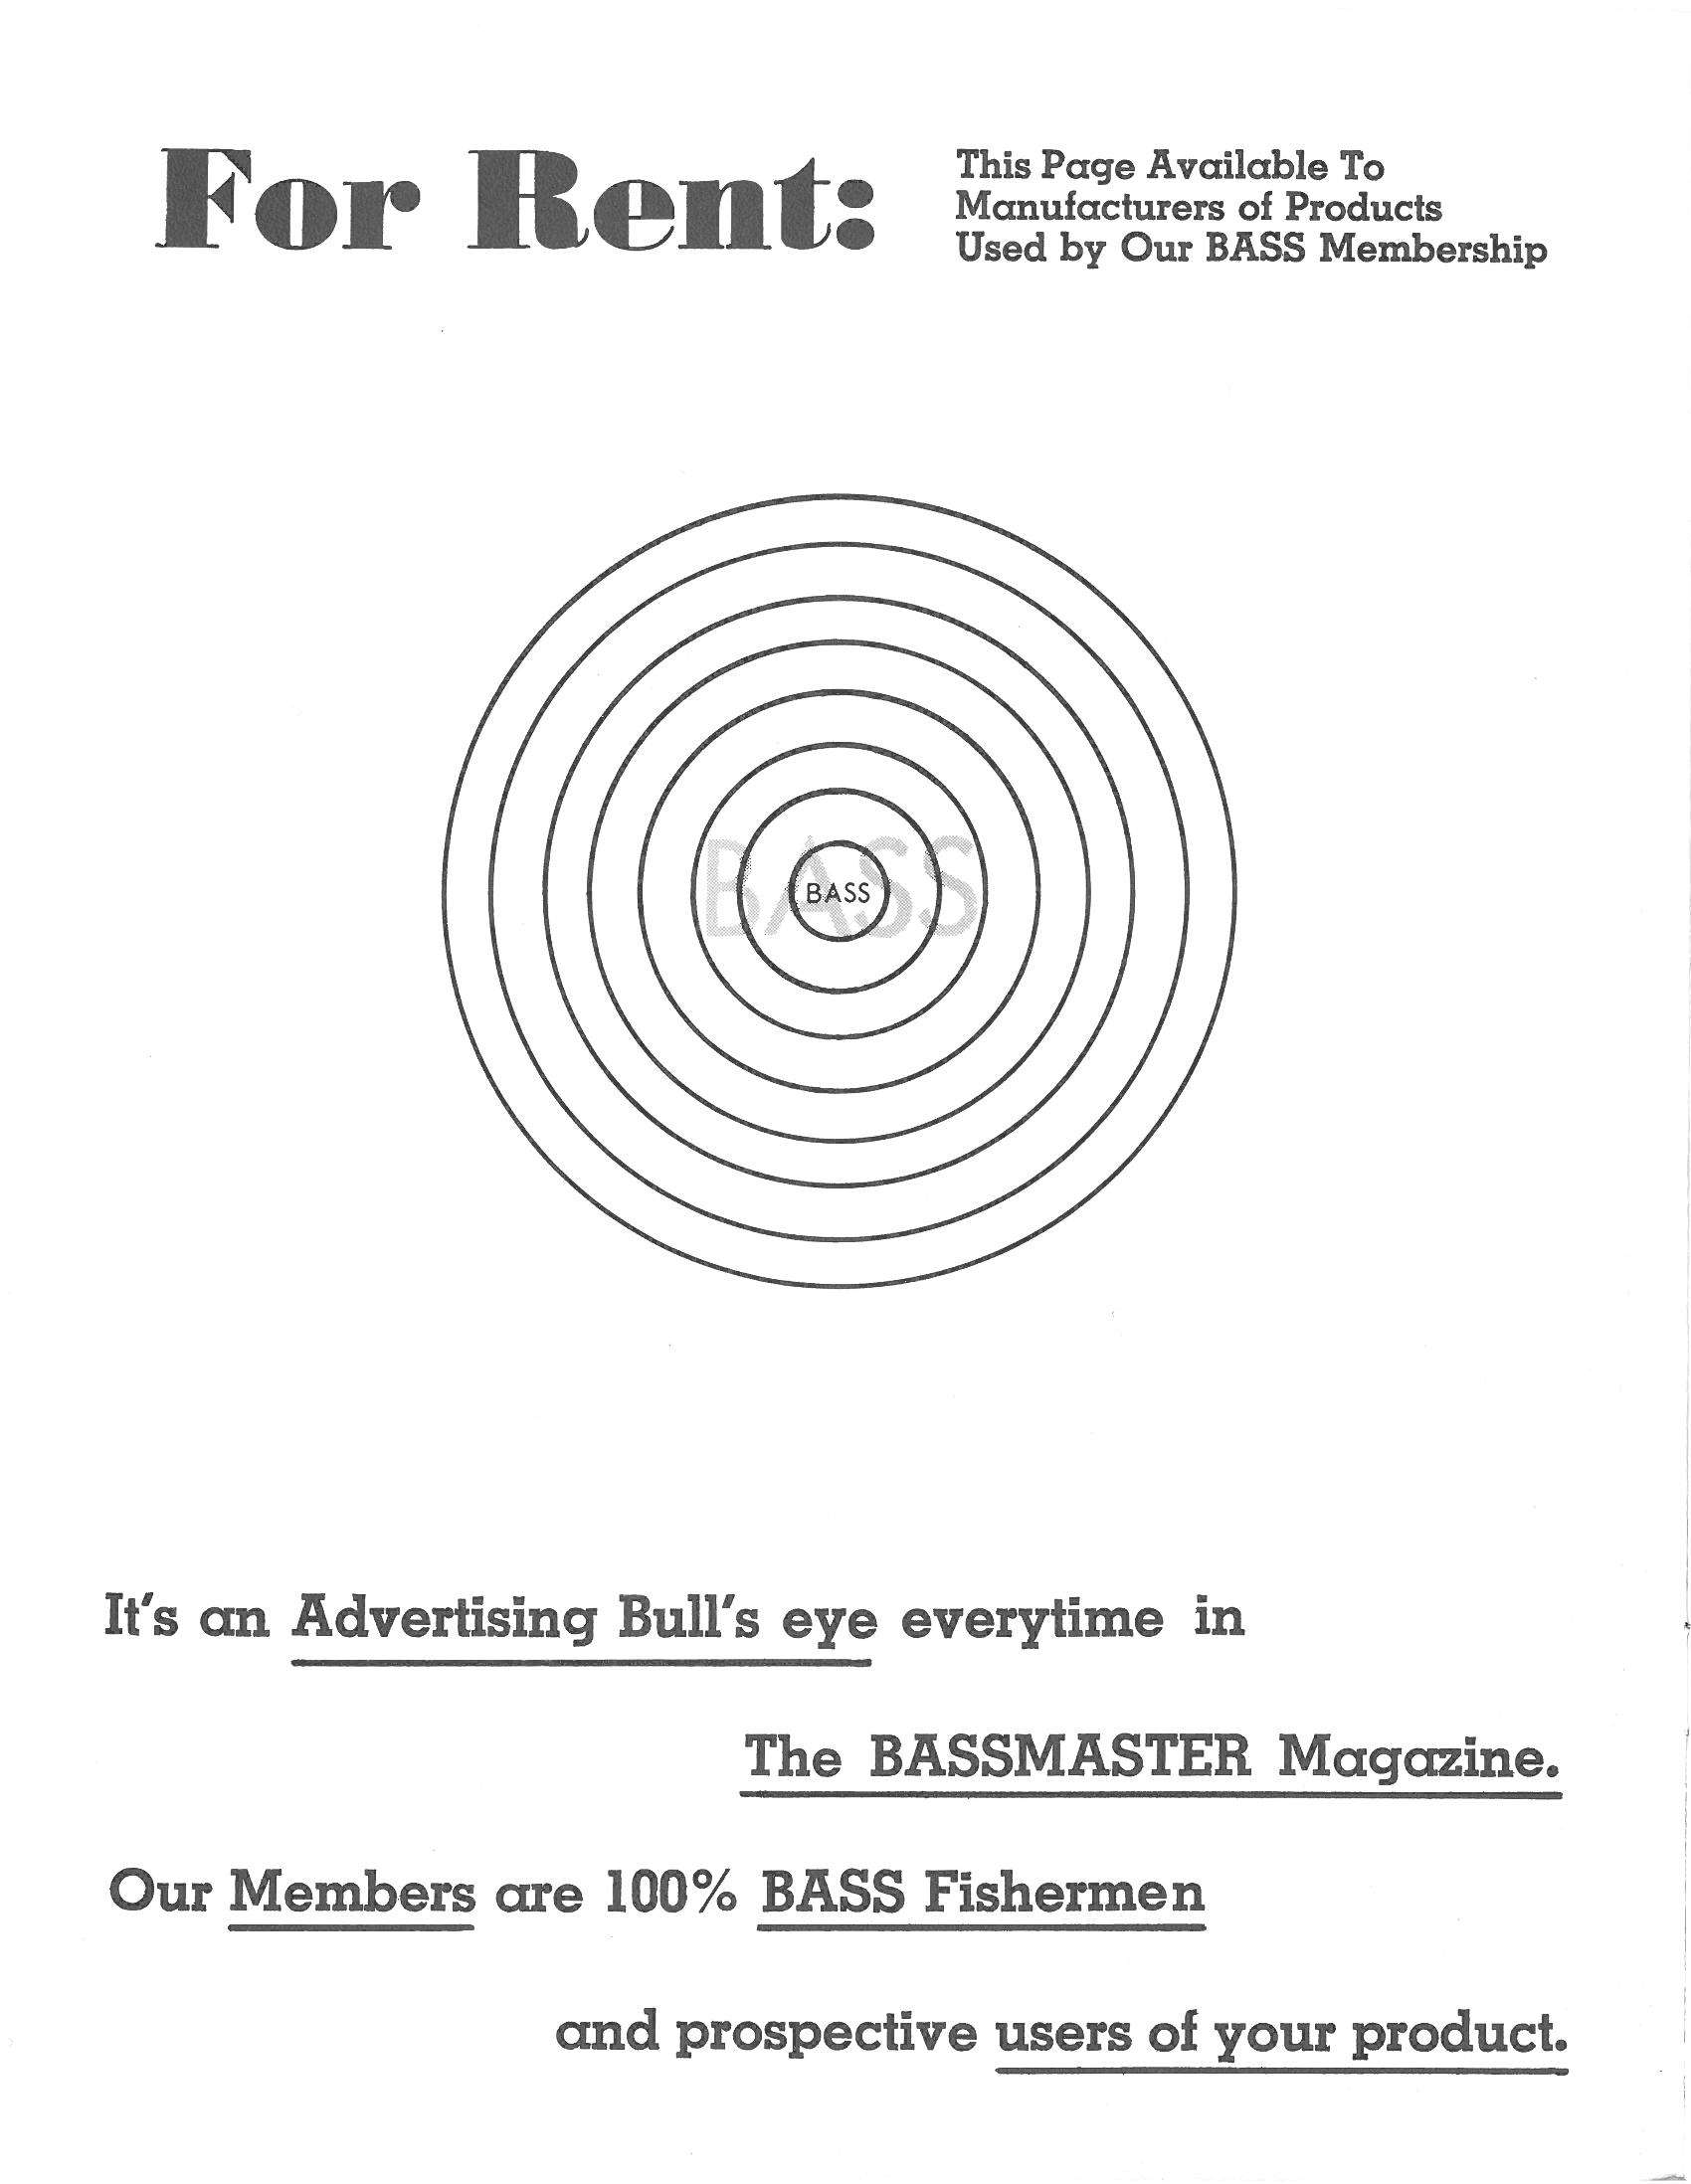 Inside the spring issue's front cover, there is a full page offering advertising opportunities in the magazine. Though the covers feature color images, the interior pages are all black and white. 